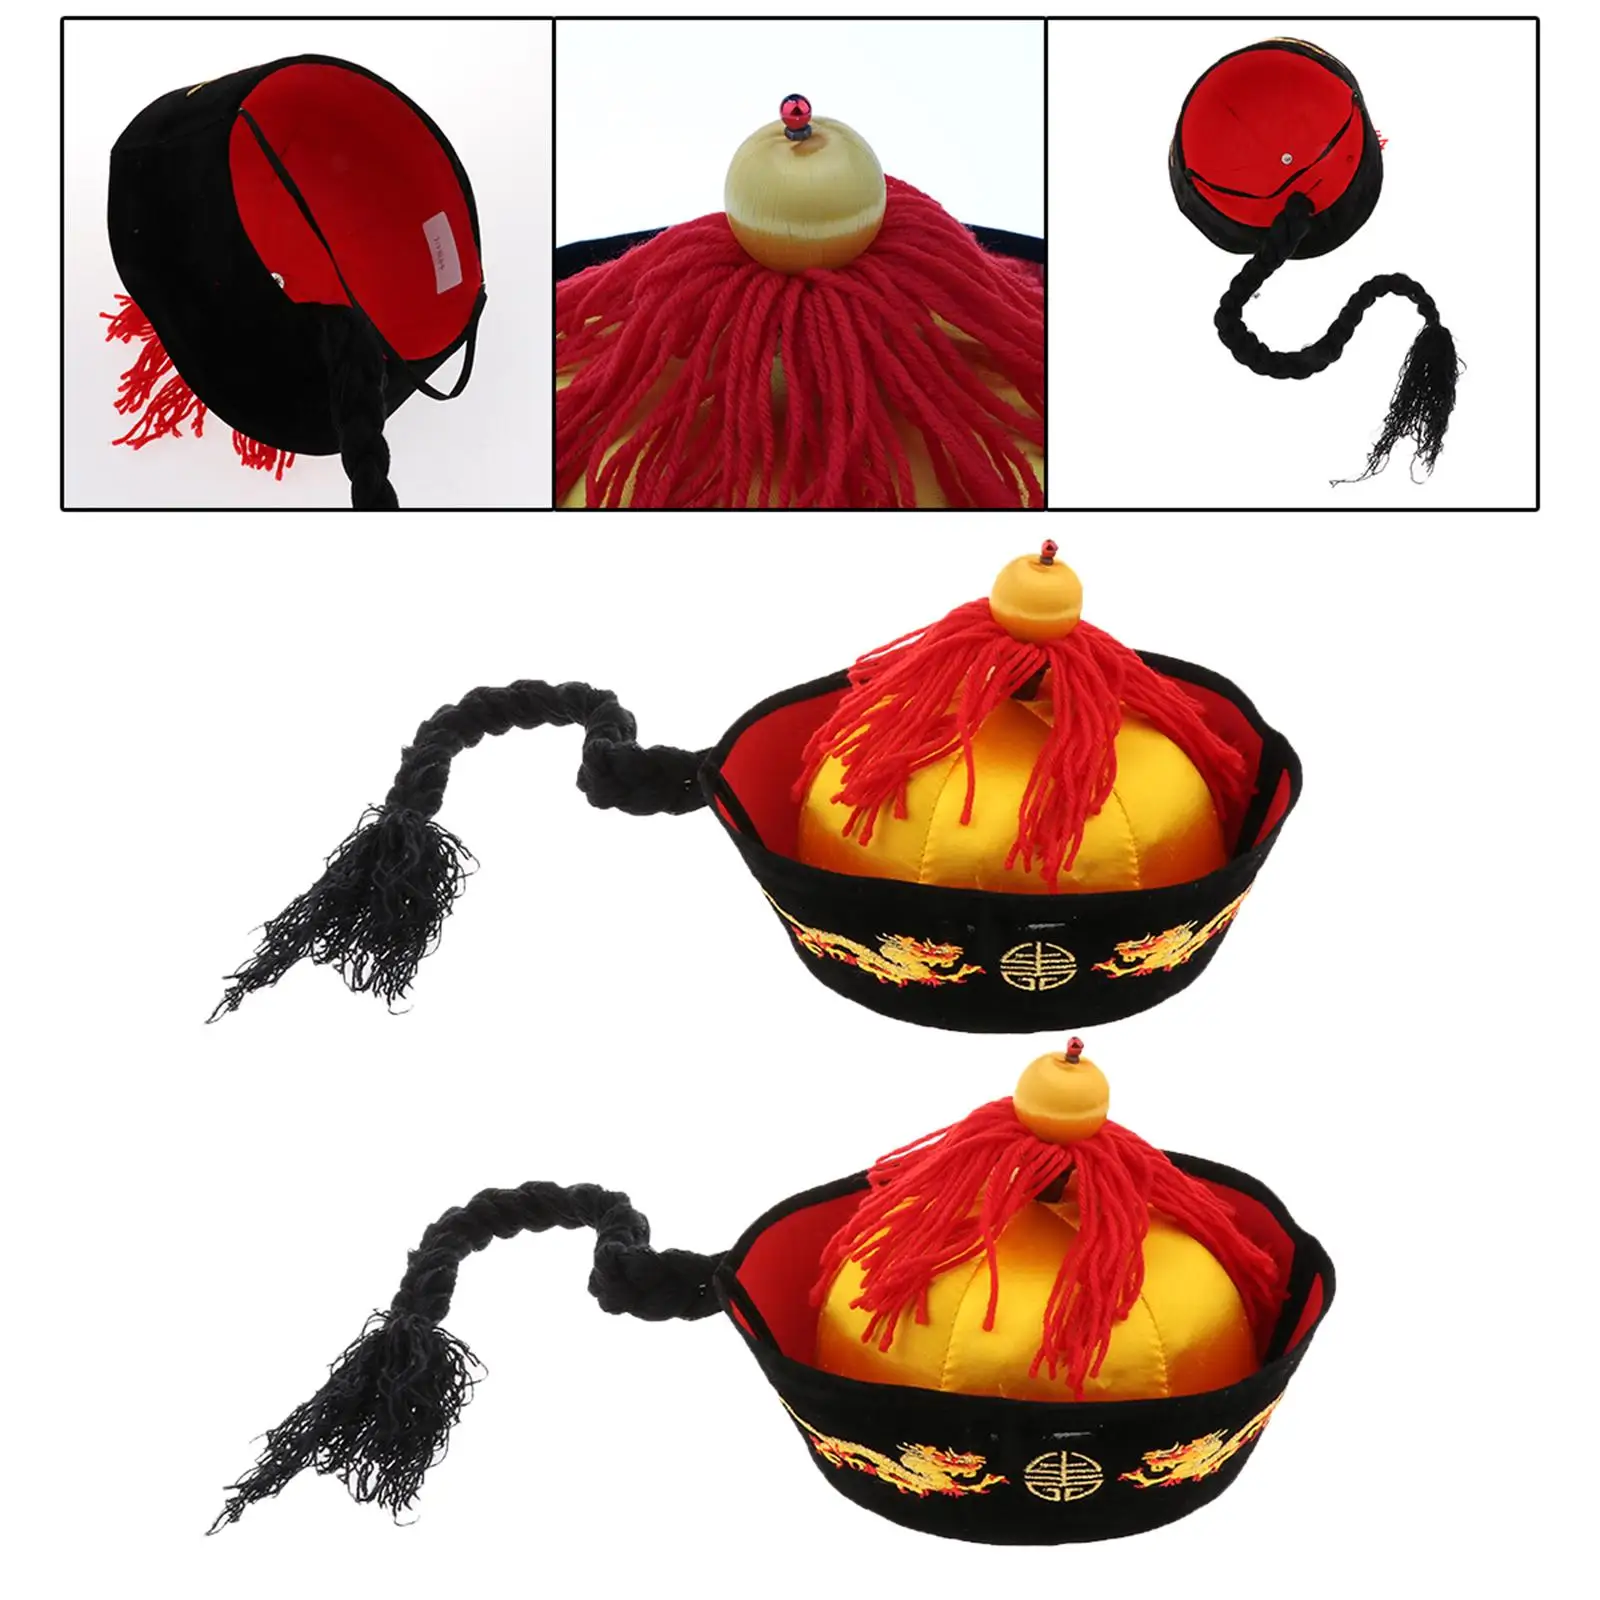 Chinese Emperor Hat with Braid Decorative Ethnic Hat for Photography Props Party Masquerade Stage Performance Fancy Dress